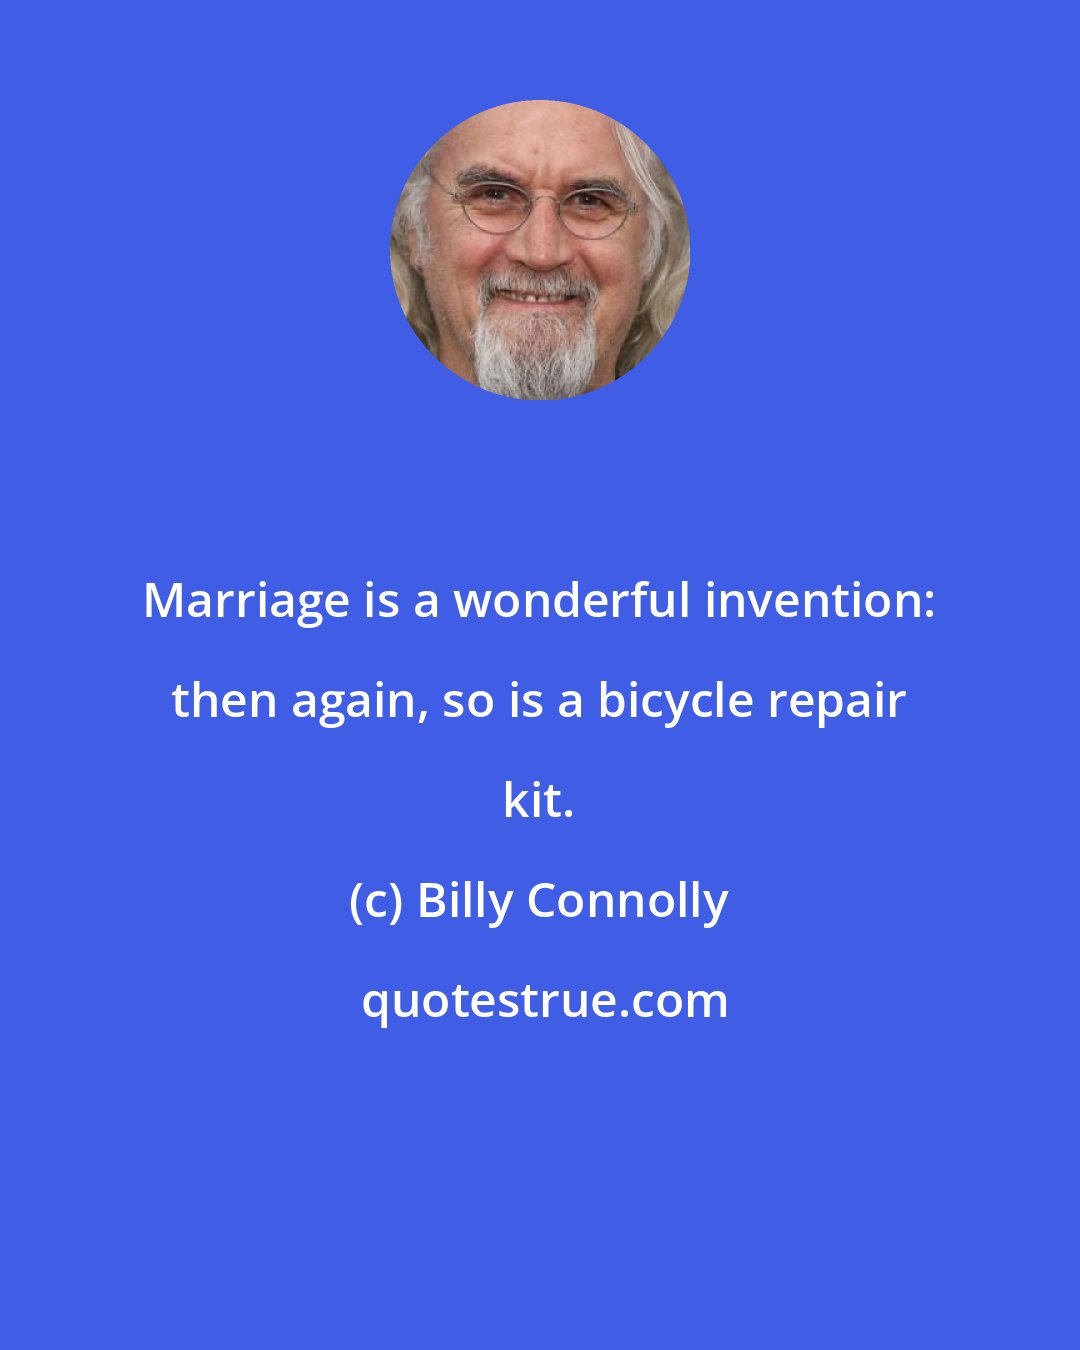 Billy Connolly: Marriage is a wonderful invention: then again, so is a bicycle repair kit.